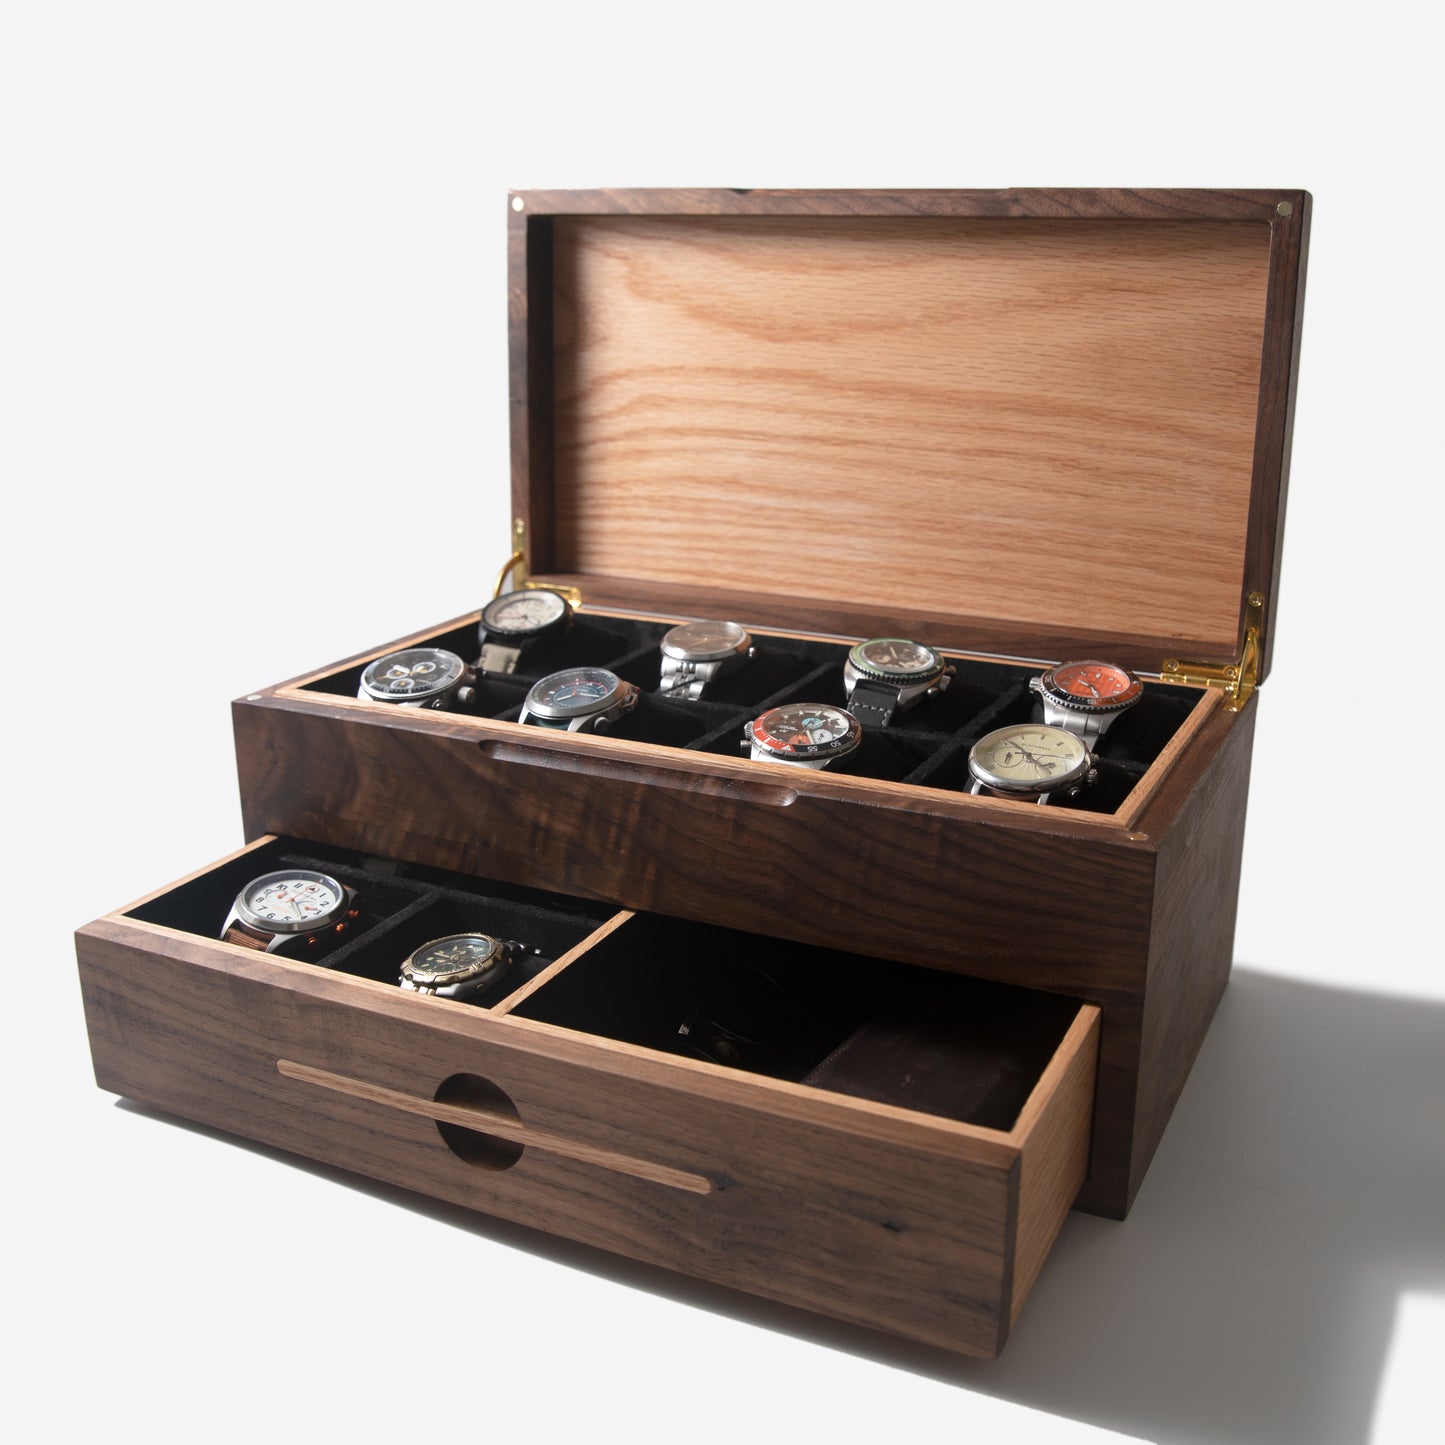 Watch Box with Drawer - Black Walnut and Oak - 12 to 16 Watch Compartments - Personalized Gift